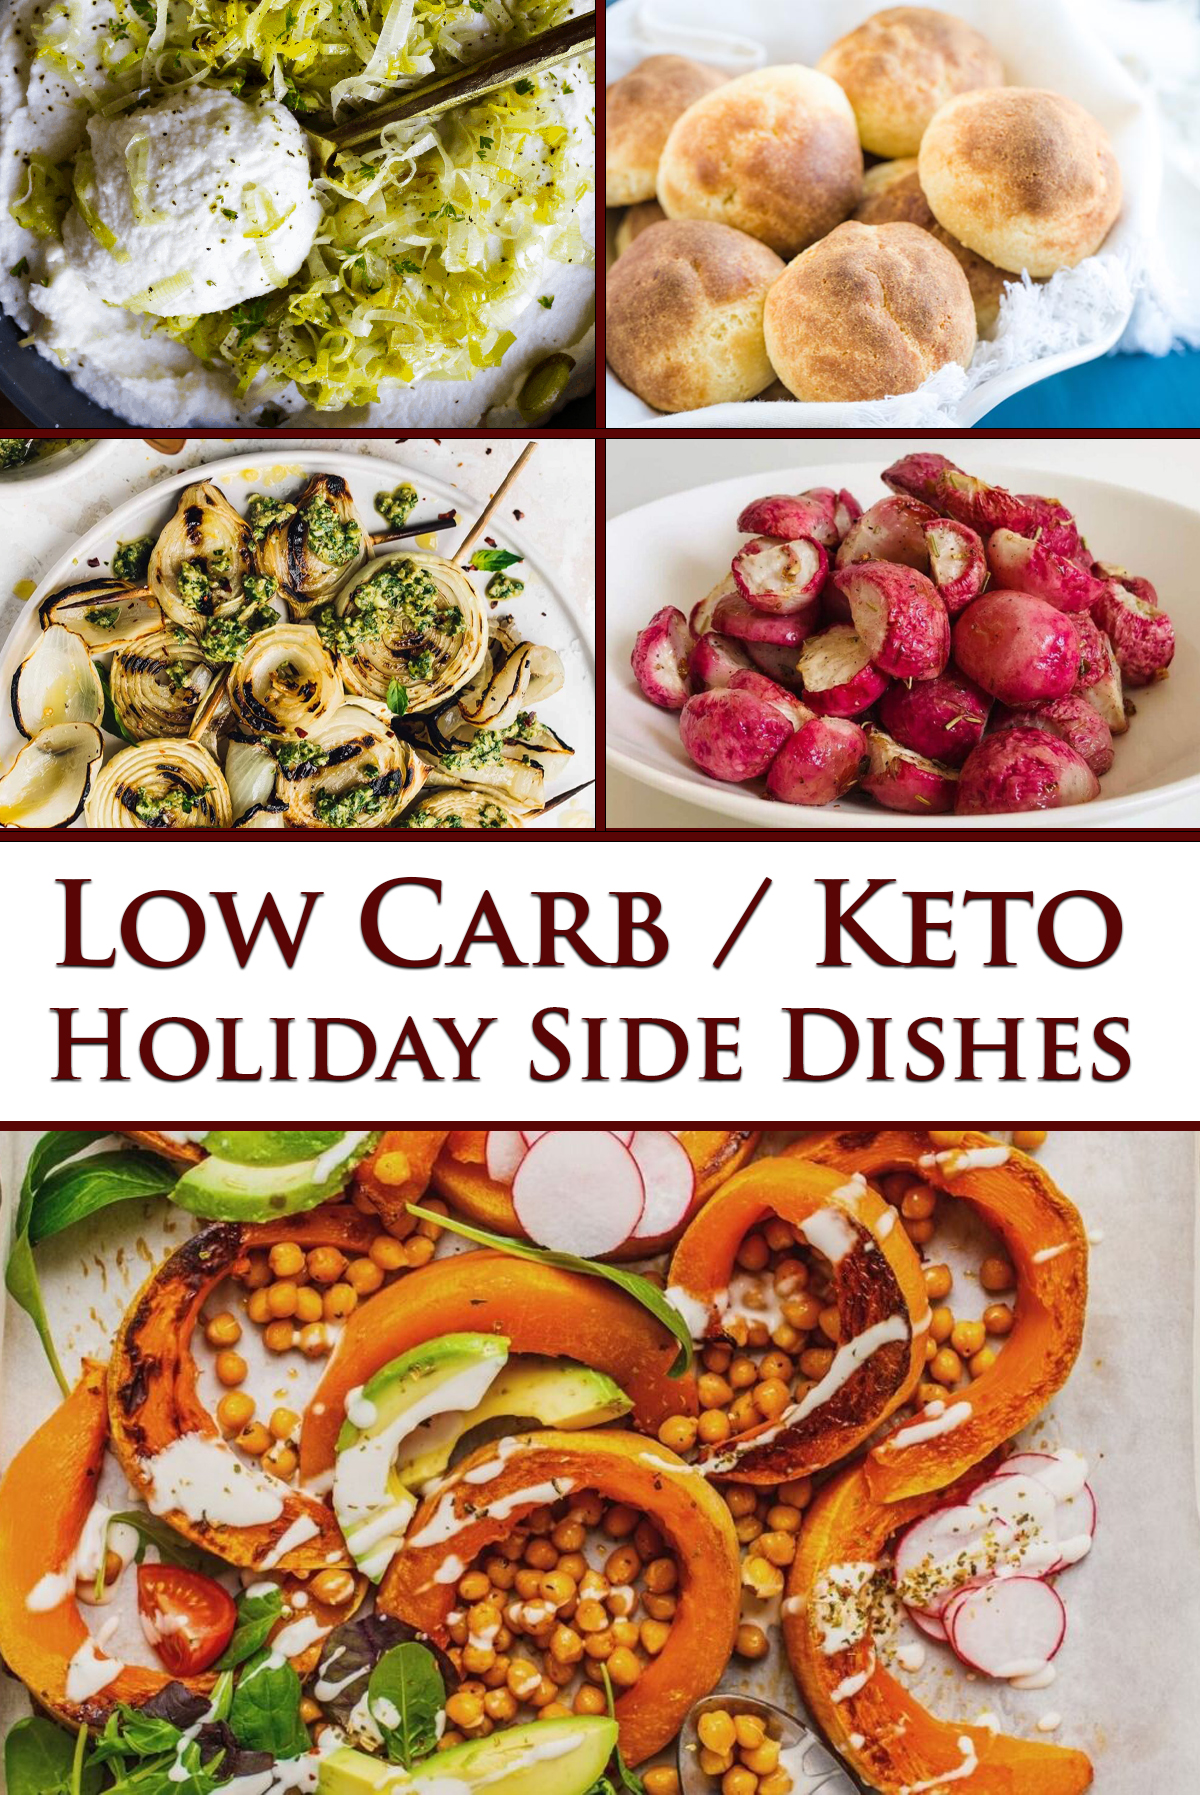 A collage image of various low carb holiday side dishes.